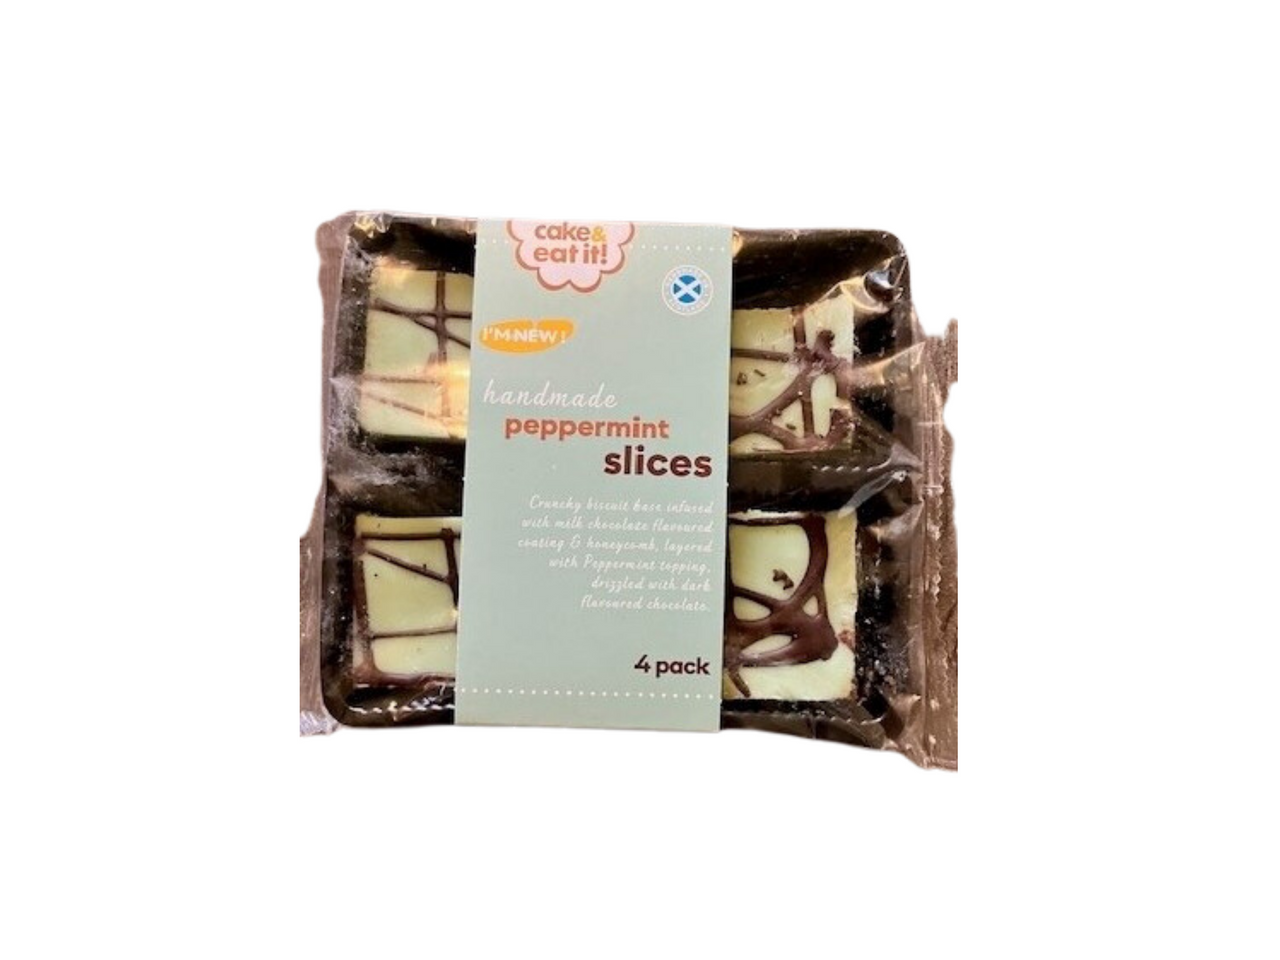 Cake & Eat It! Peppermint Slices 4 Pack (Sep 23 - Feb 24) RRP 1.49 CLEARANCE XL 89p or 2 for 1.50